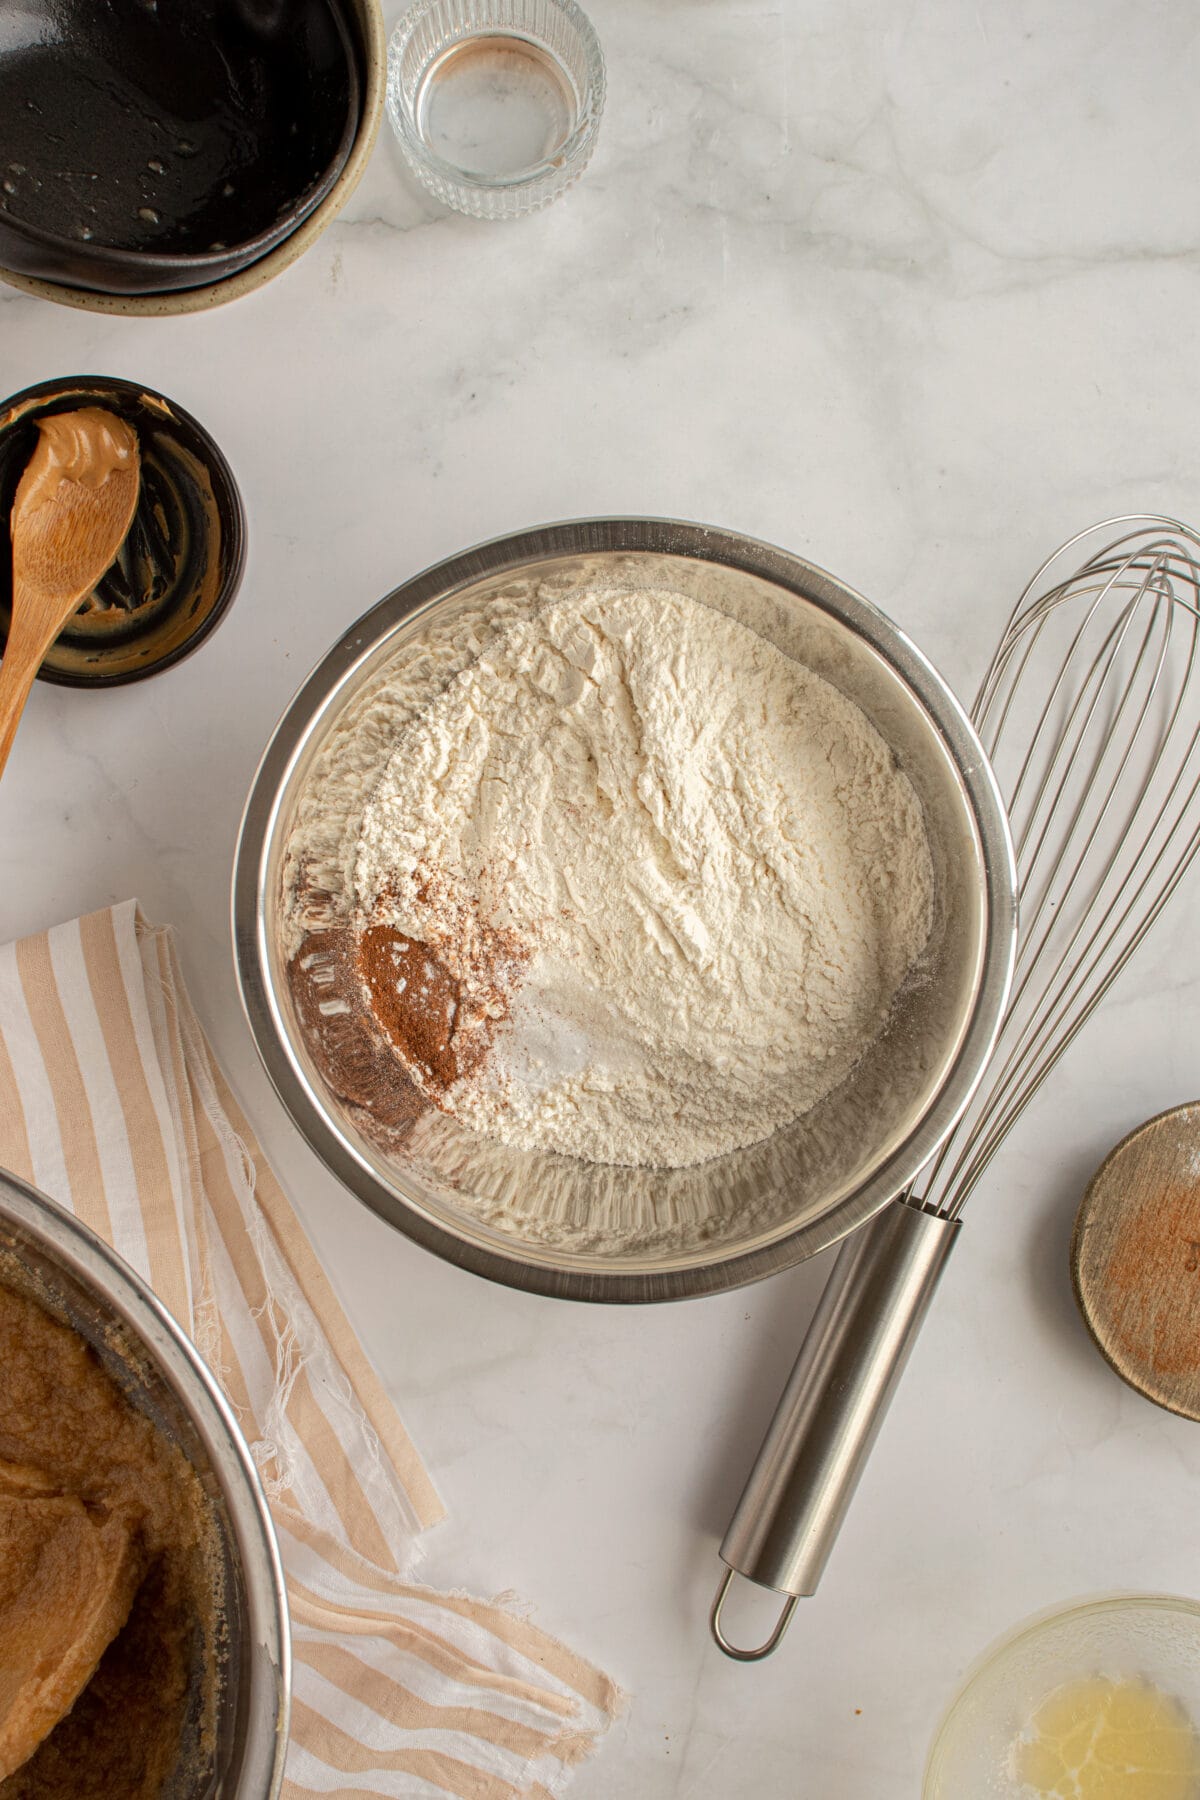 Dry ingredients in a metal bowl next to a whisk.